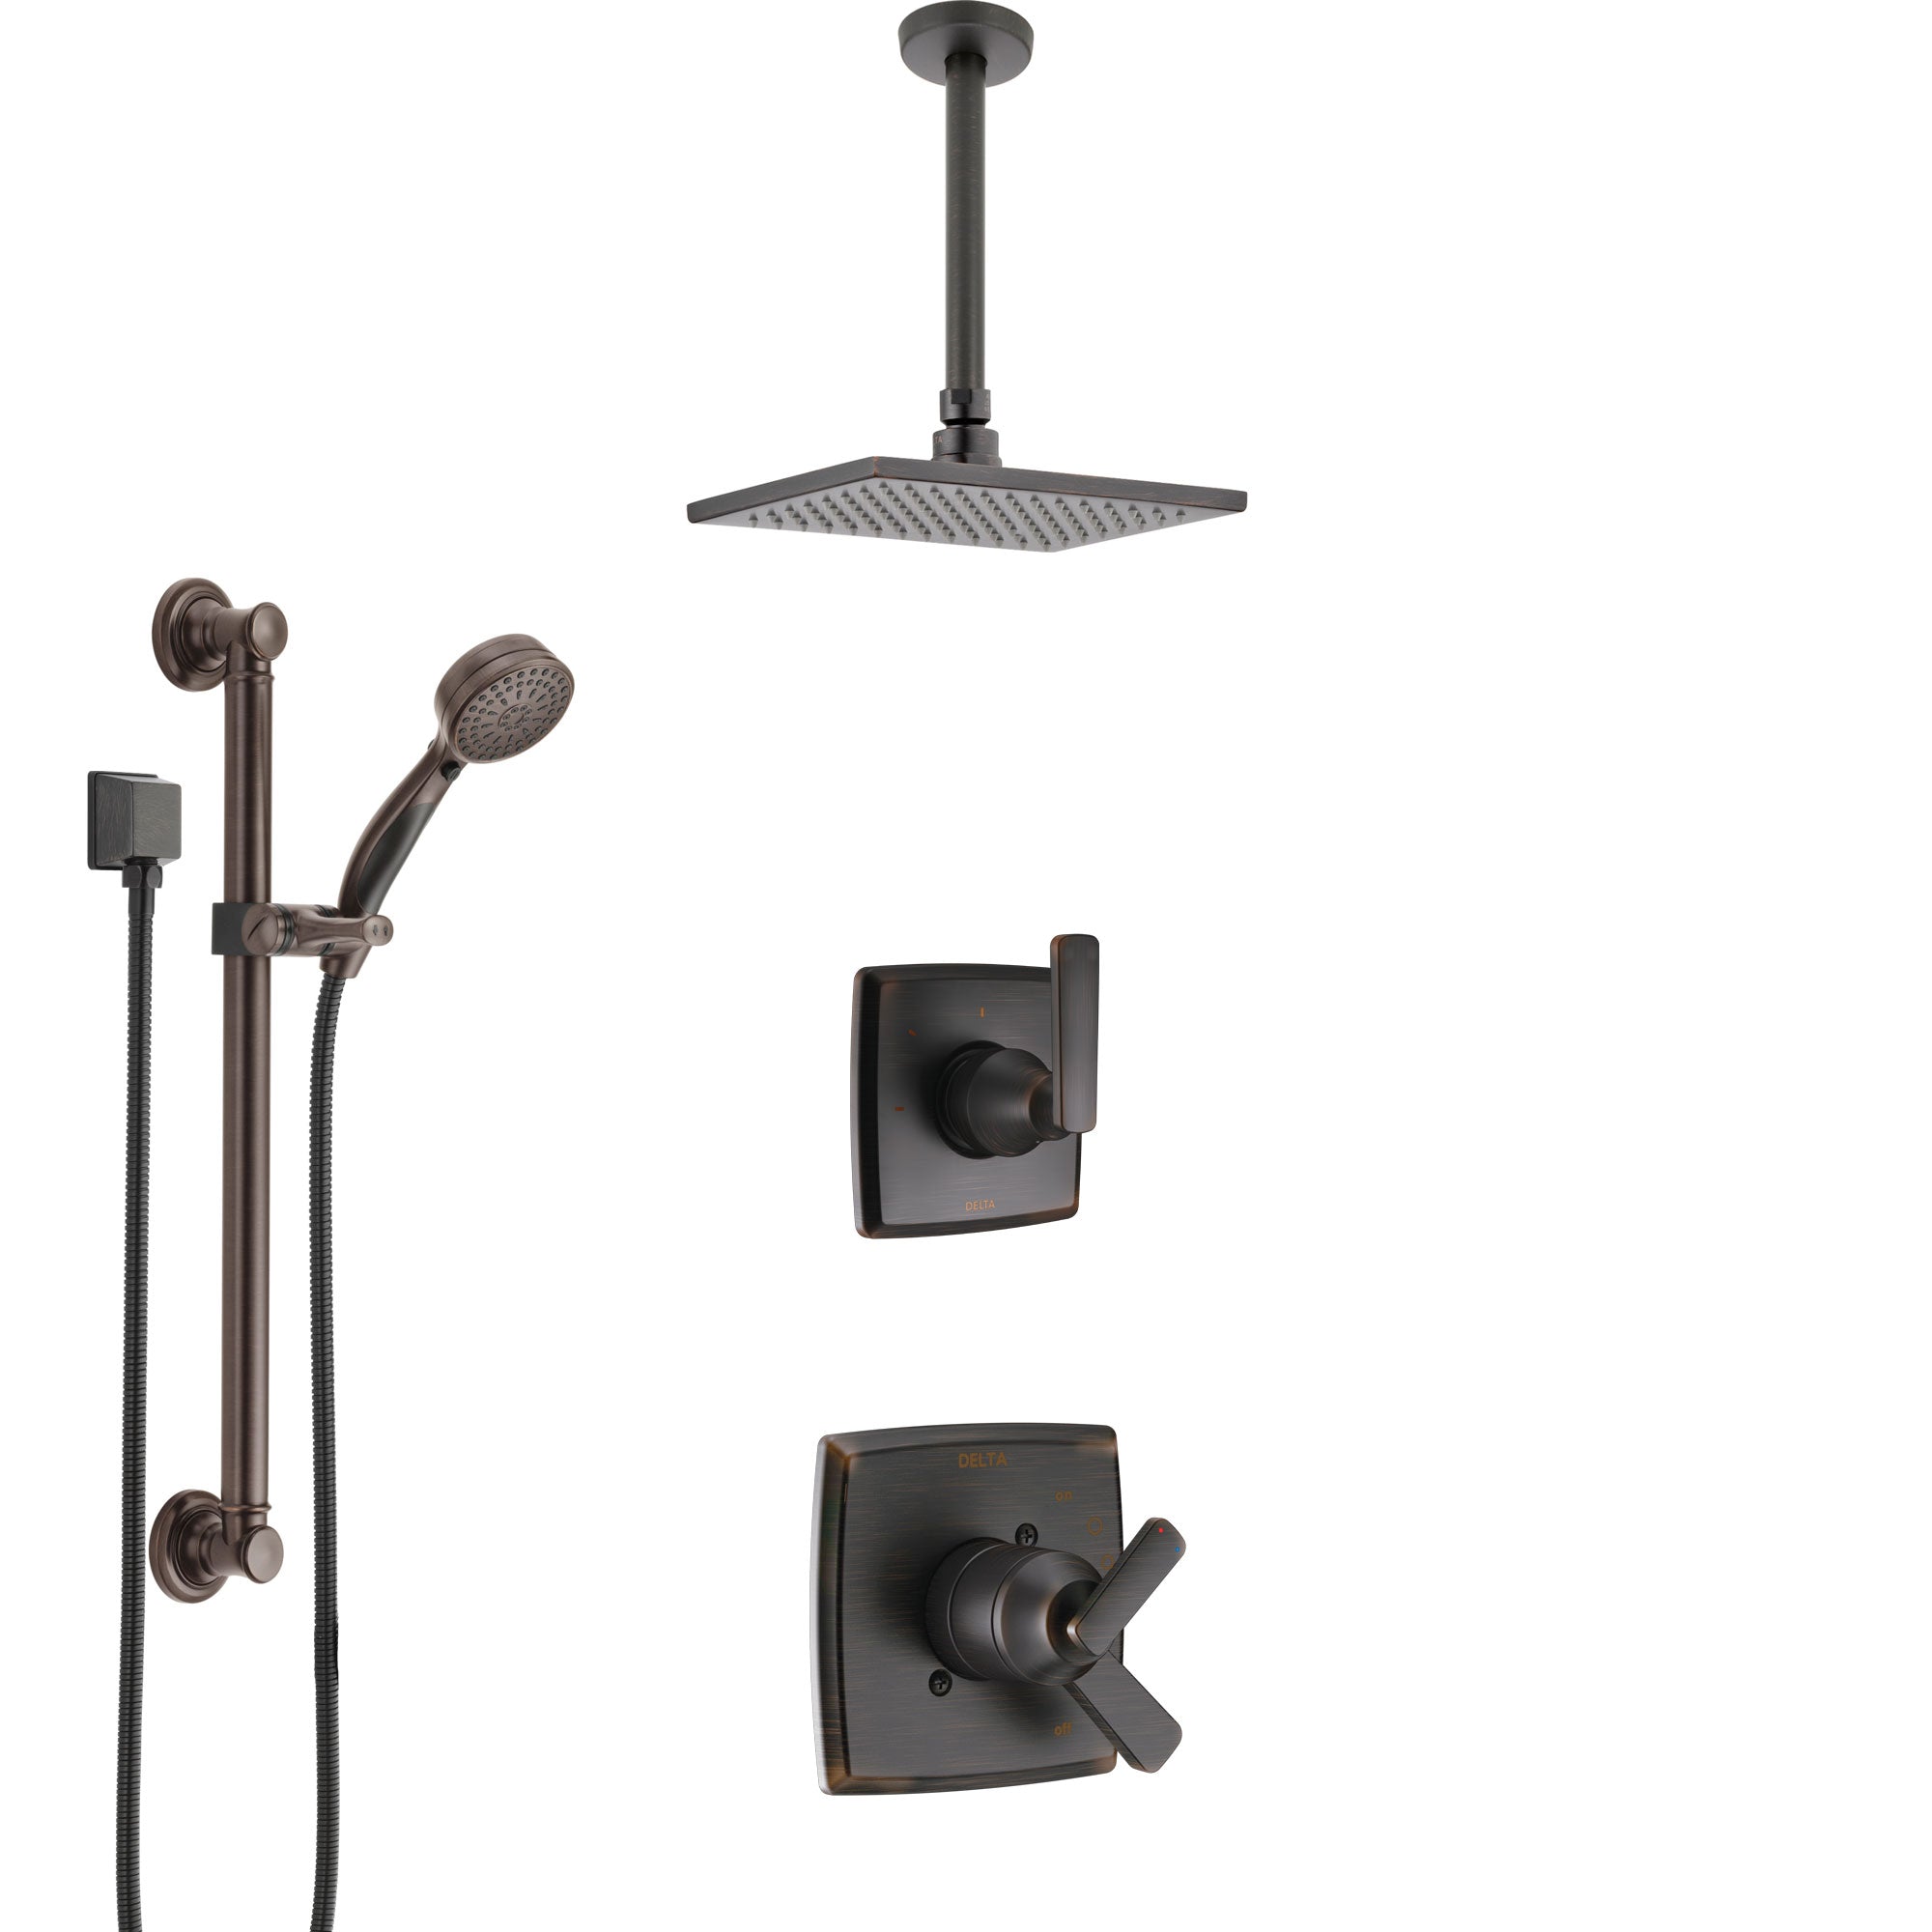 Delta Ashlyn Venetian Bronze Shower System with Dual Control Handle, Diverter, Ceiling Mount Showerhead, and Hand Shower with Grab Bar SS1764RB2